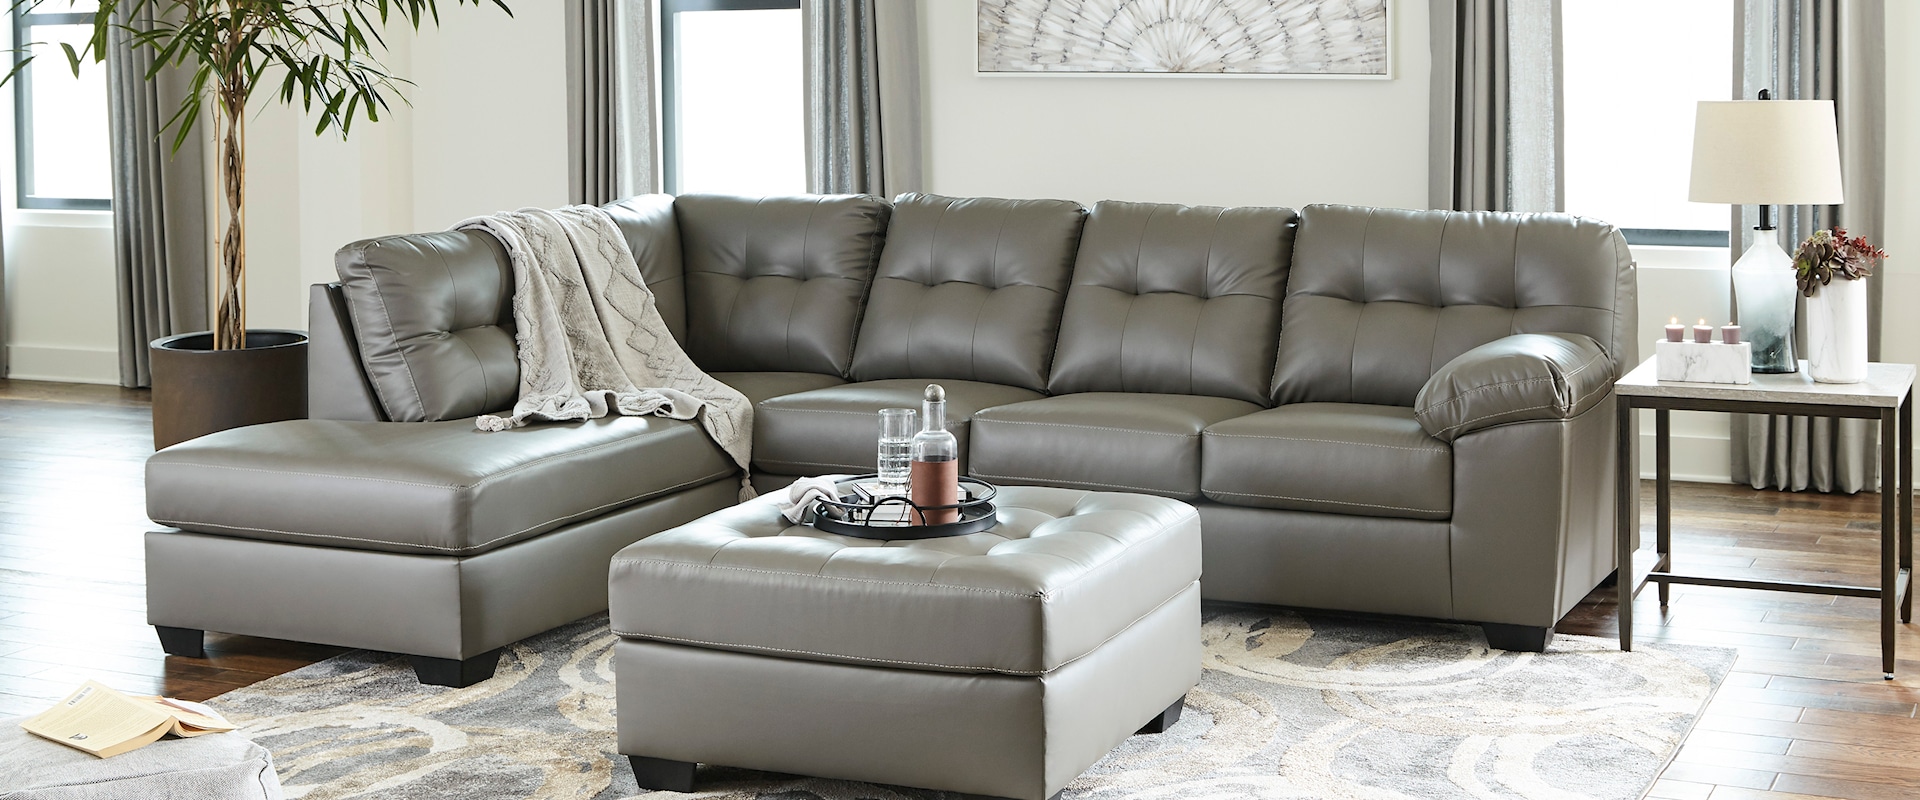 Sectional and Ottoman